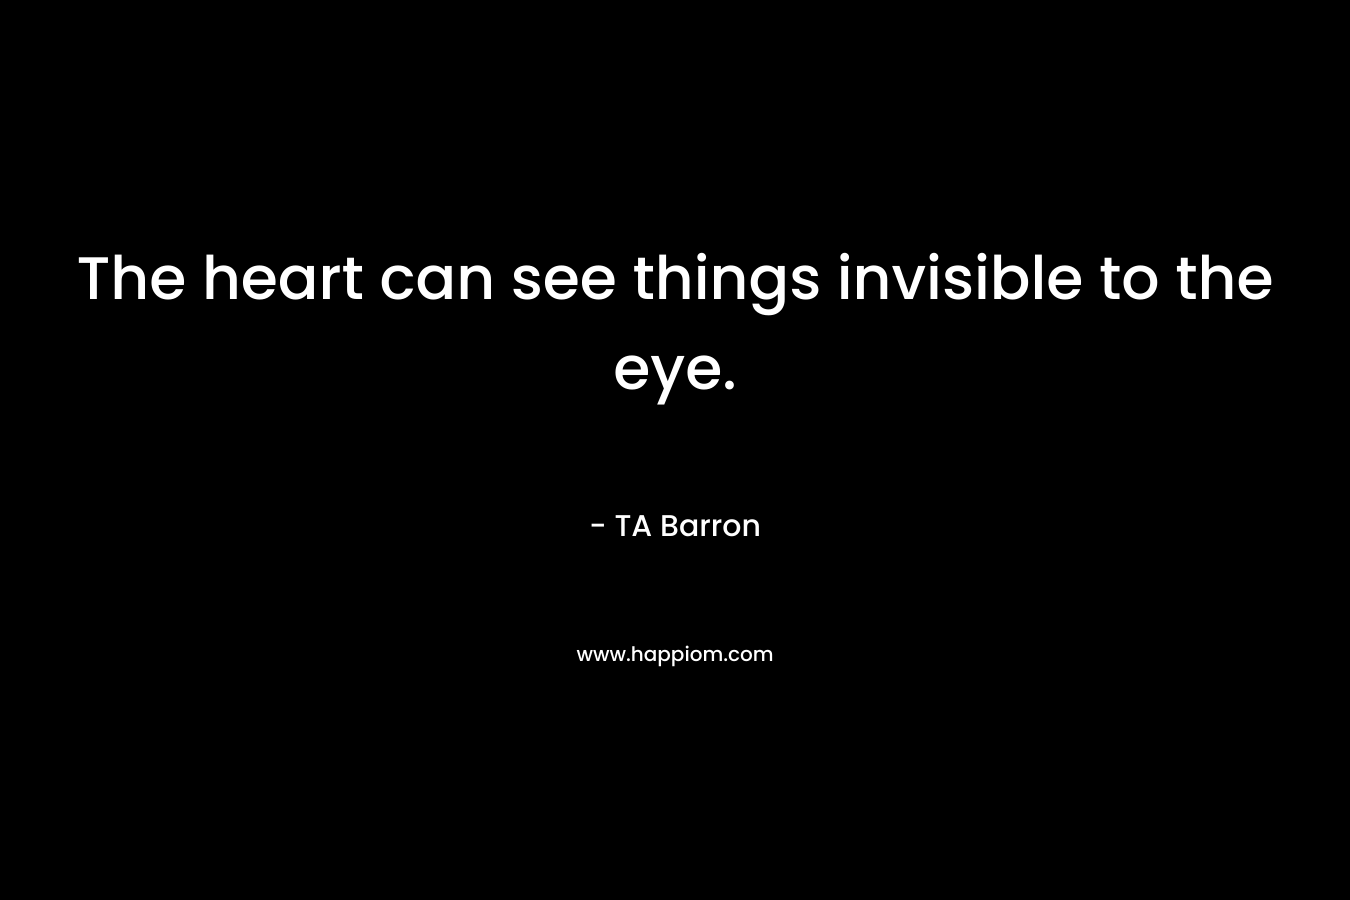 The heart can see things invisible to the eye.